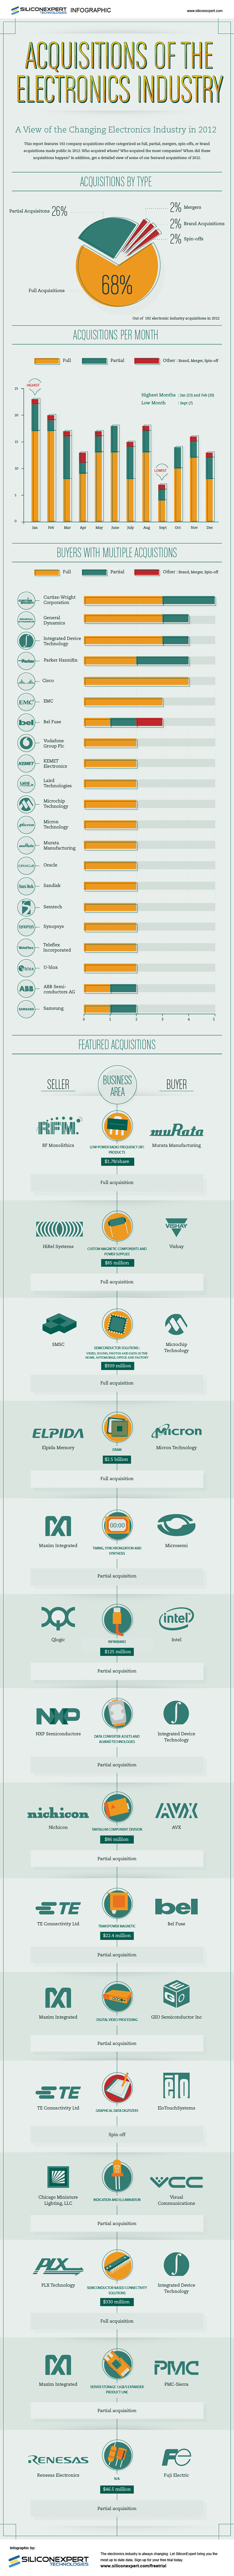 Acquisitions of the Electronics Industry